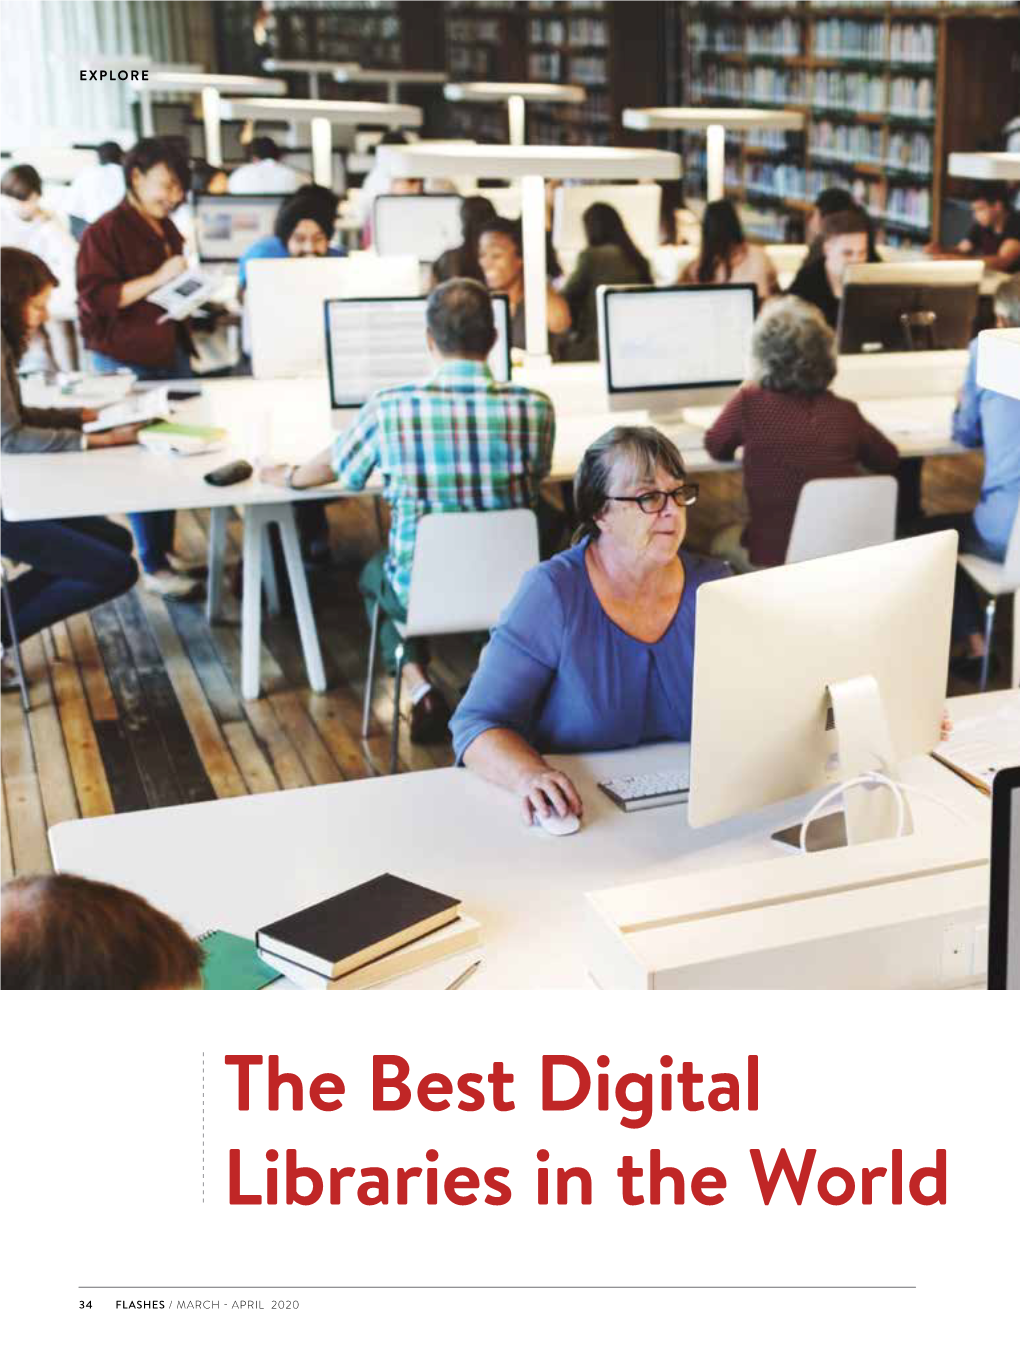 The Best Digital Libraries in the World